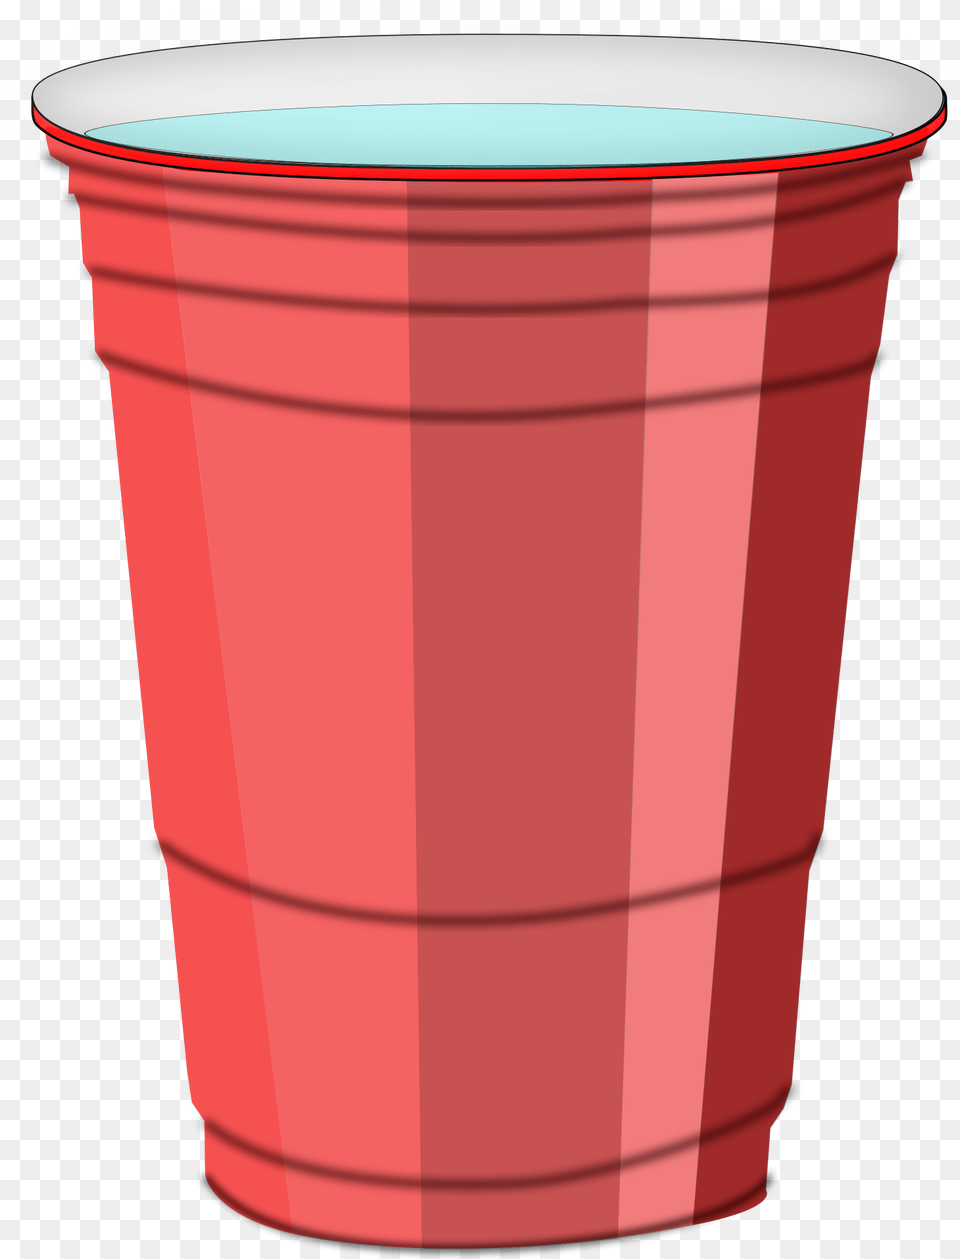 This Icons Design Of Plastic Cup With Water, Bucket, Mailbox Png